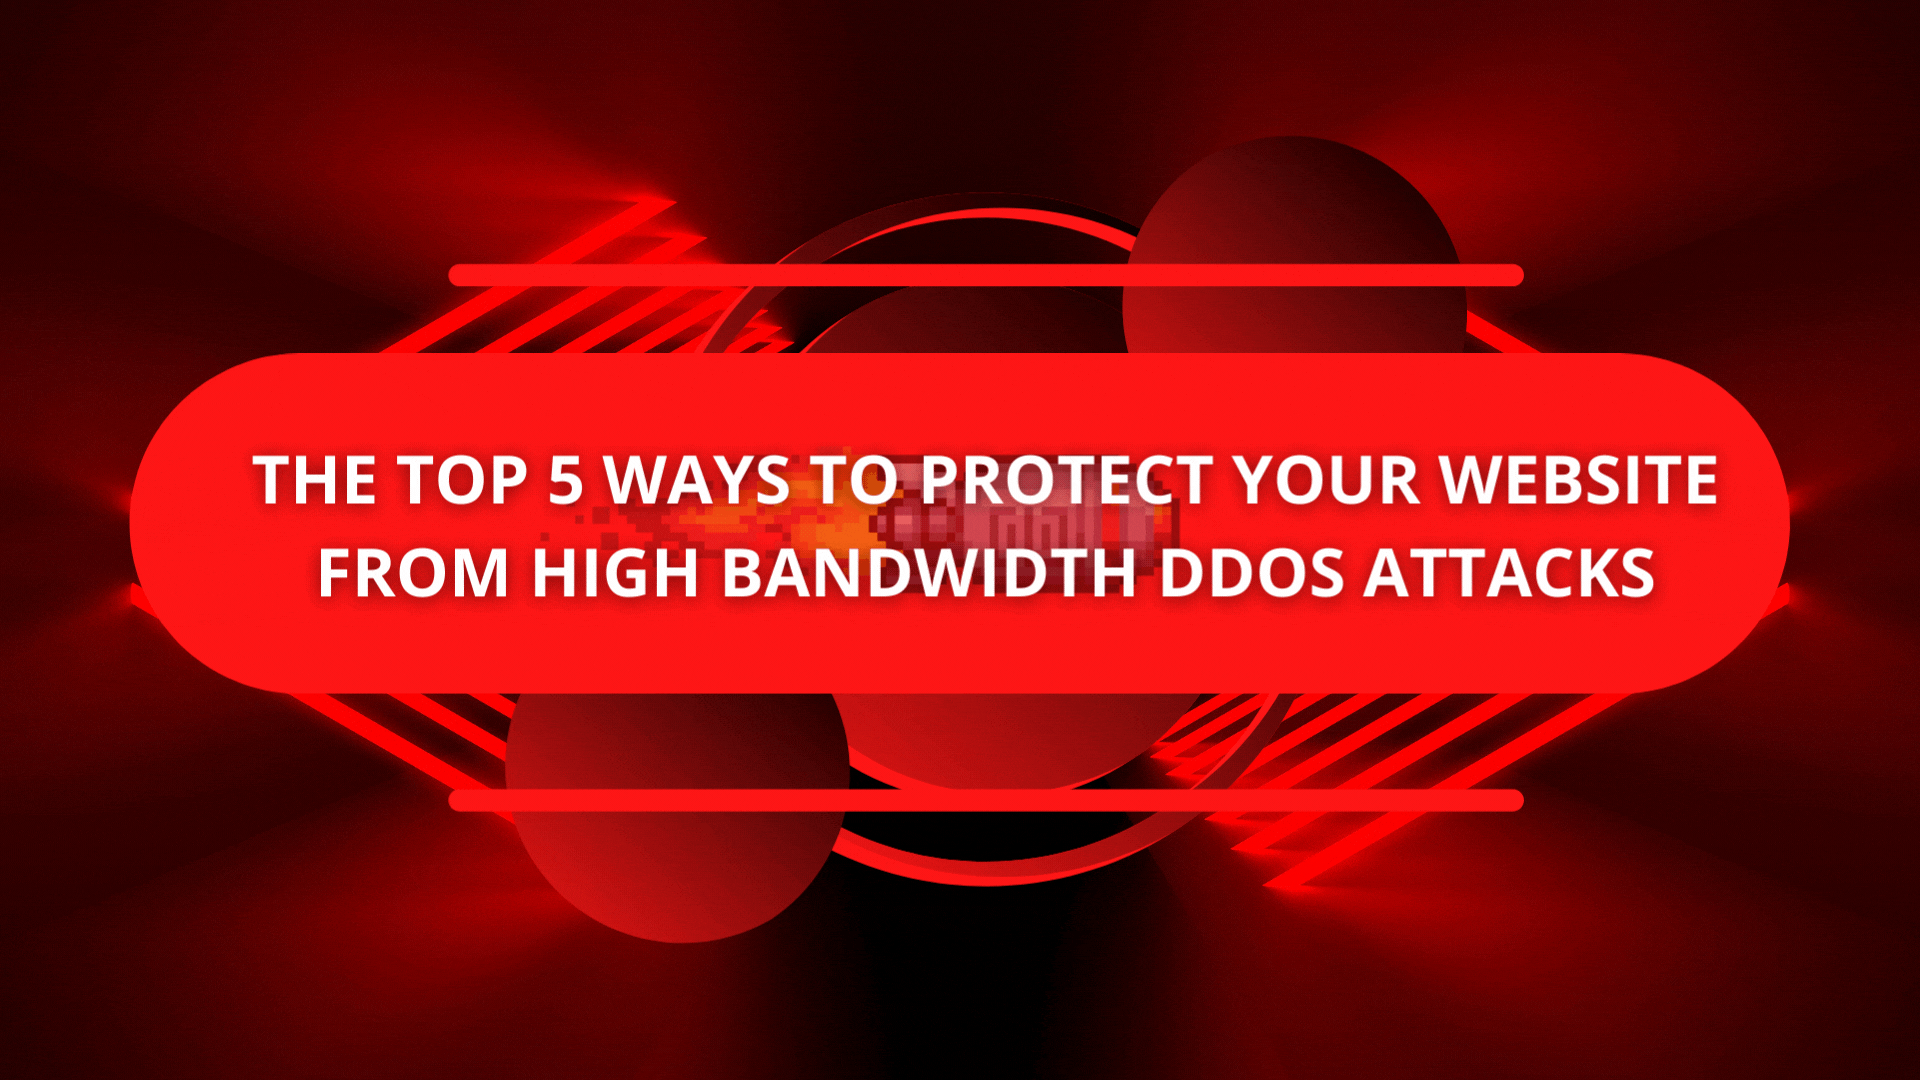 The Top 5 Ways to Protect Your Website from High Bandwidth DDoS Attacks (1)